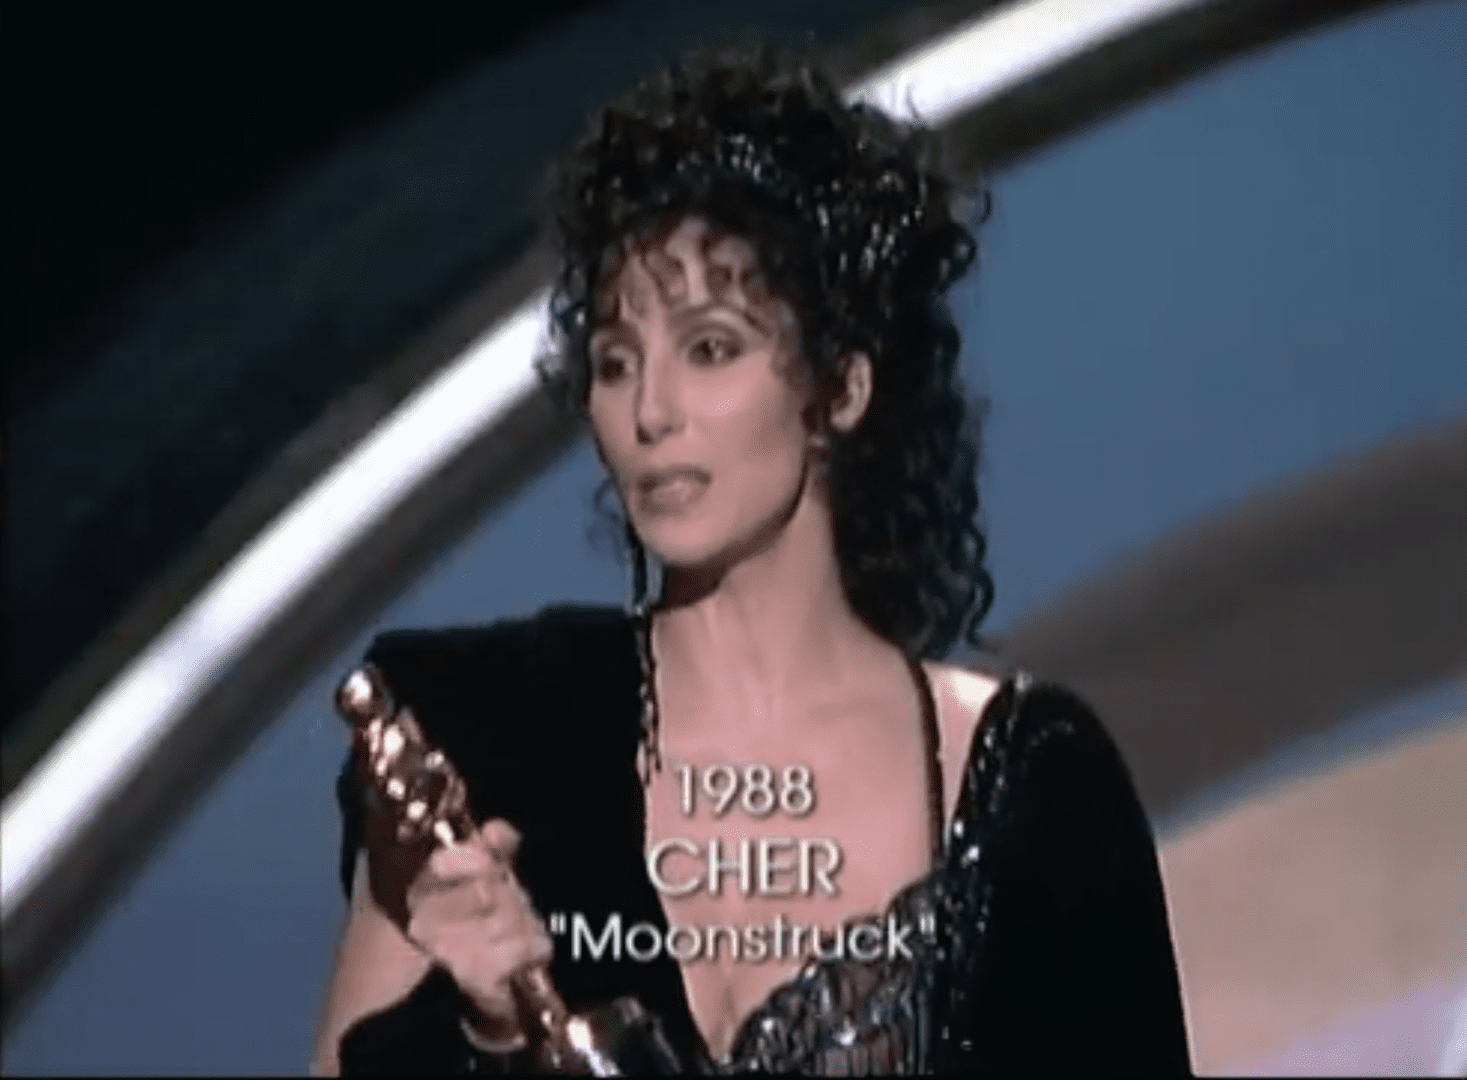 A woman holding an award in front of a microphone.